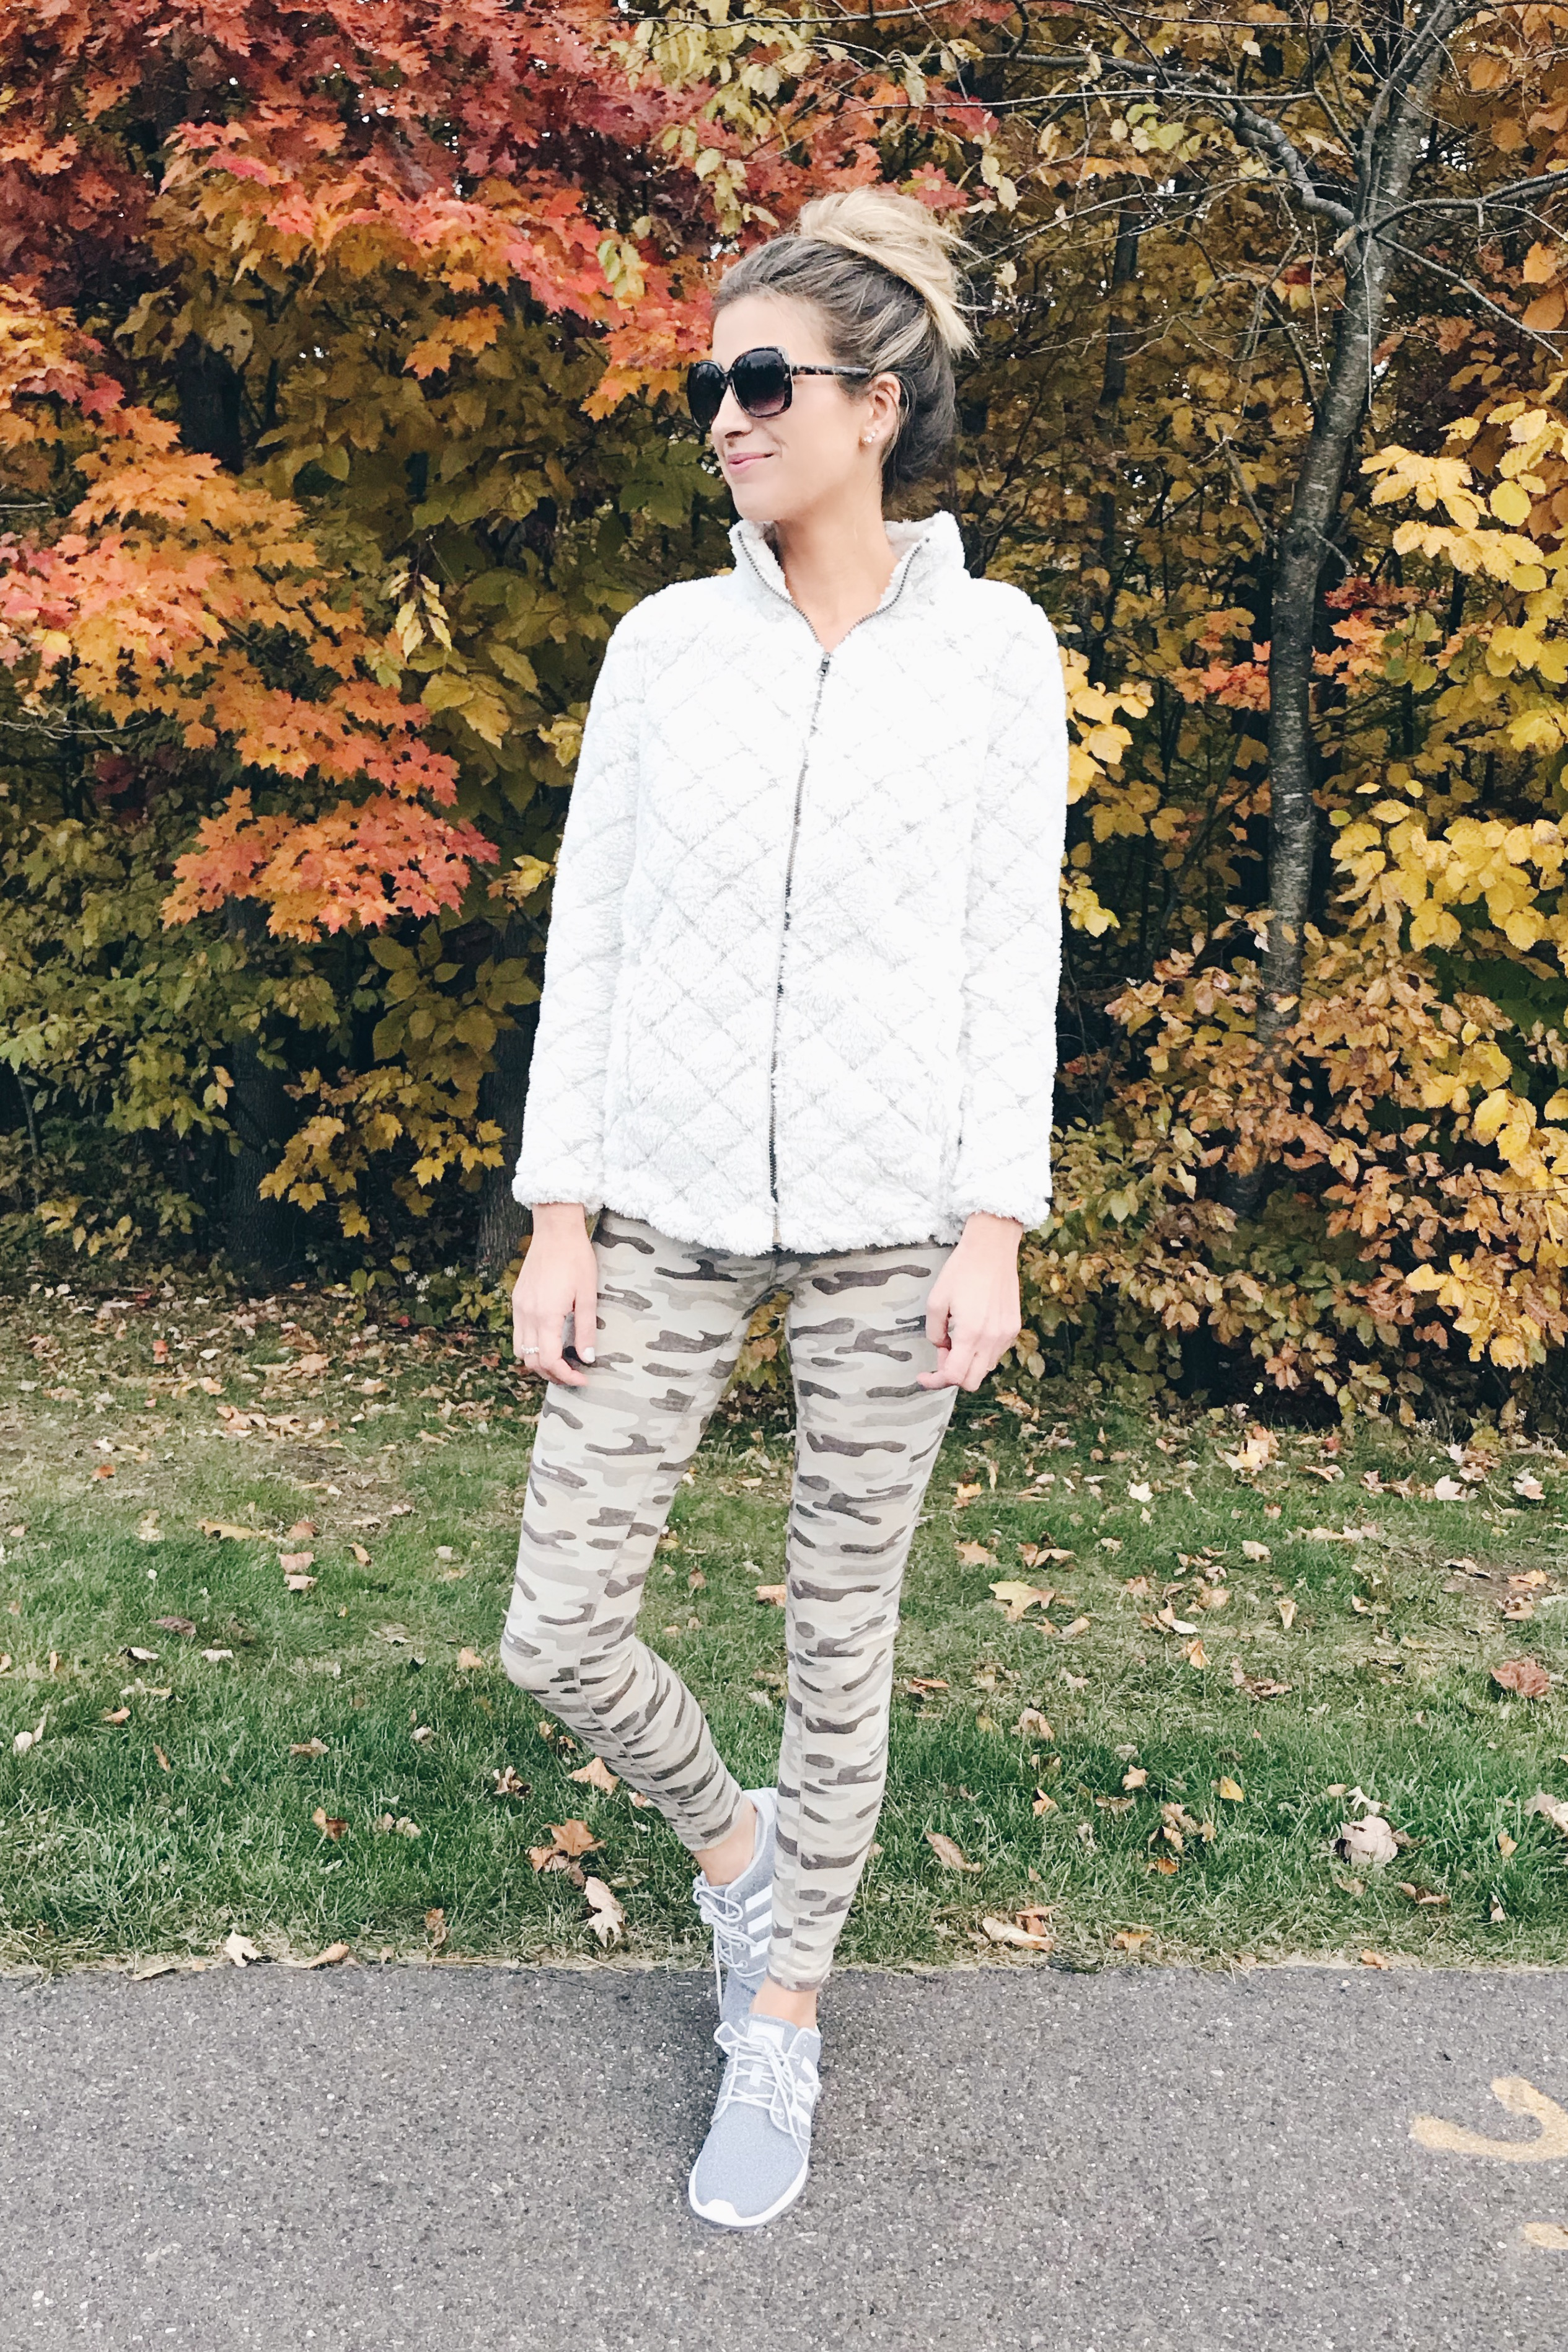 Holiday Gift Ideas for the Fit Woman | Sherpa Jacket